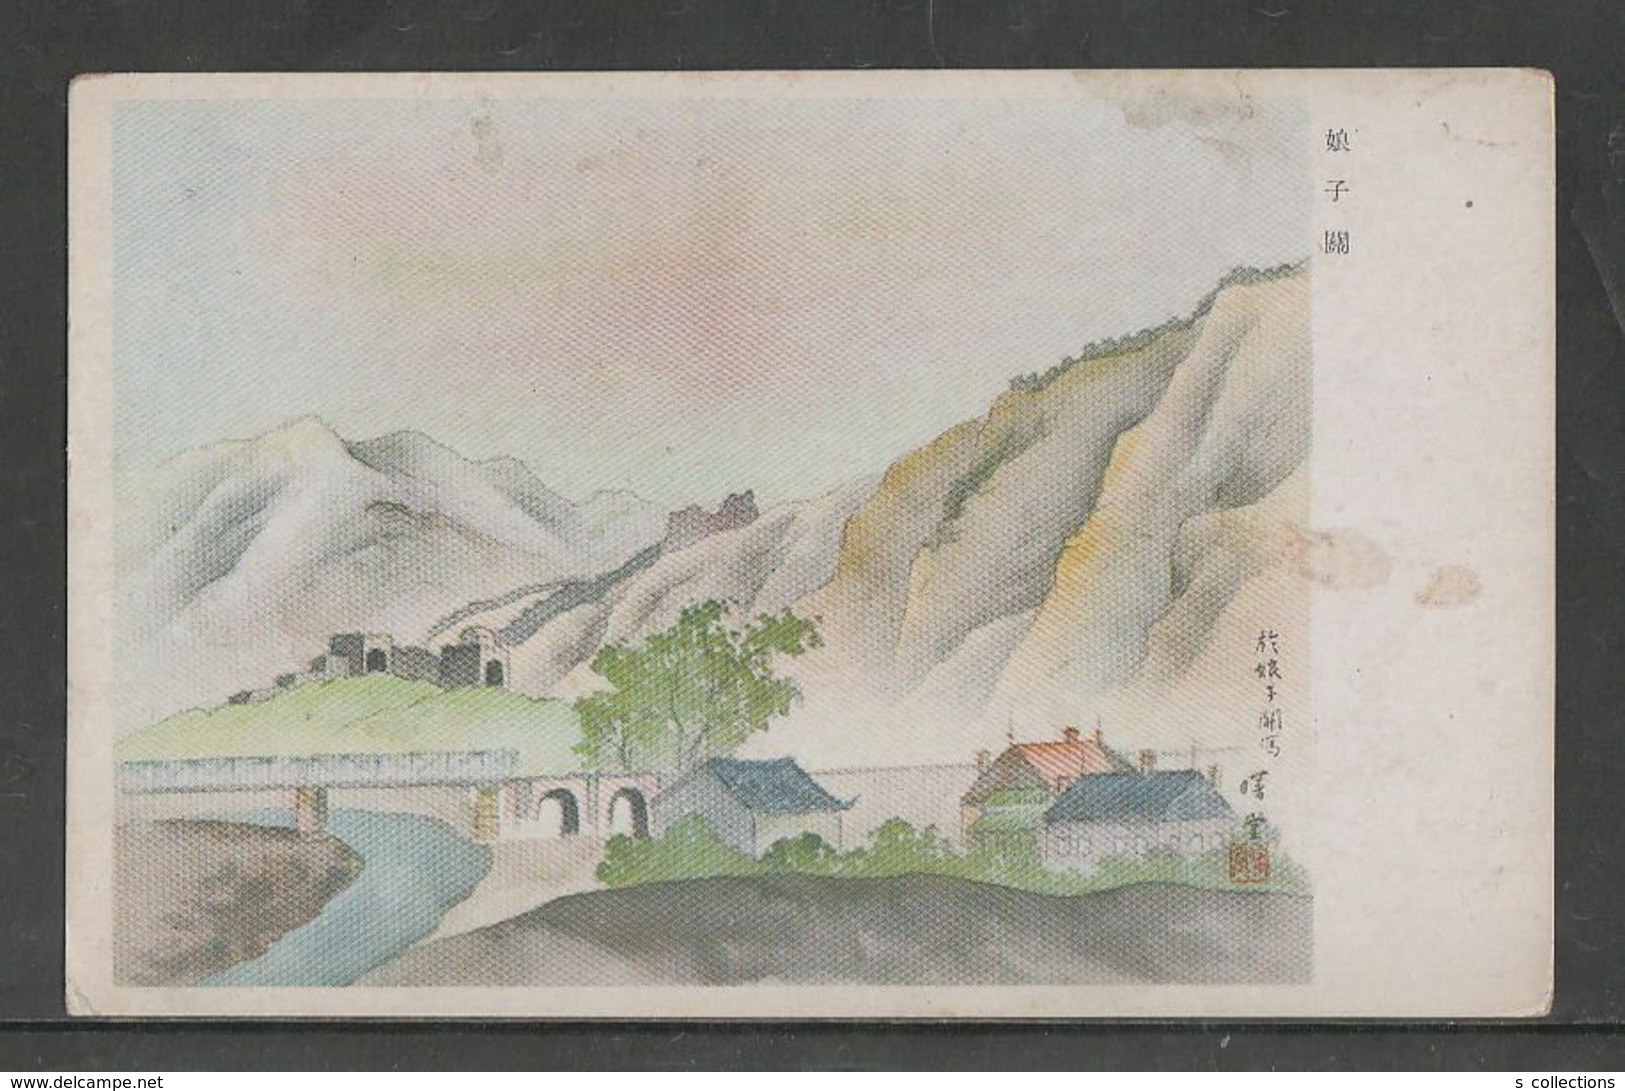 JAPAN WWII Military Niangzi-guan Picture Postcard NORTH CHINA WW2 MANCHURIA CHINE MANDCHOUKOUO JAPON GIAPPONE - 1941-45 Chine Du Nord